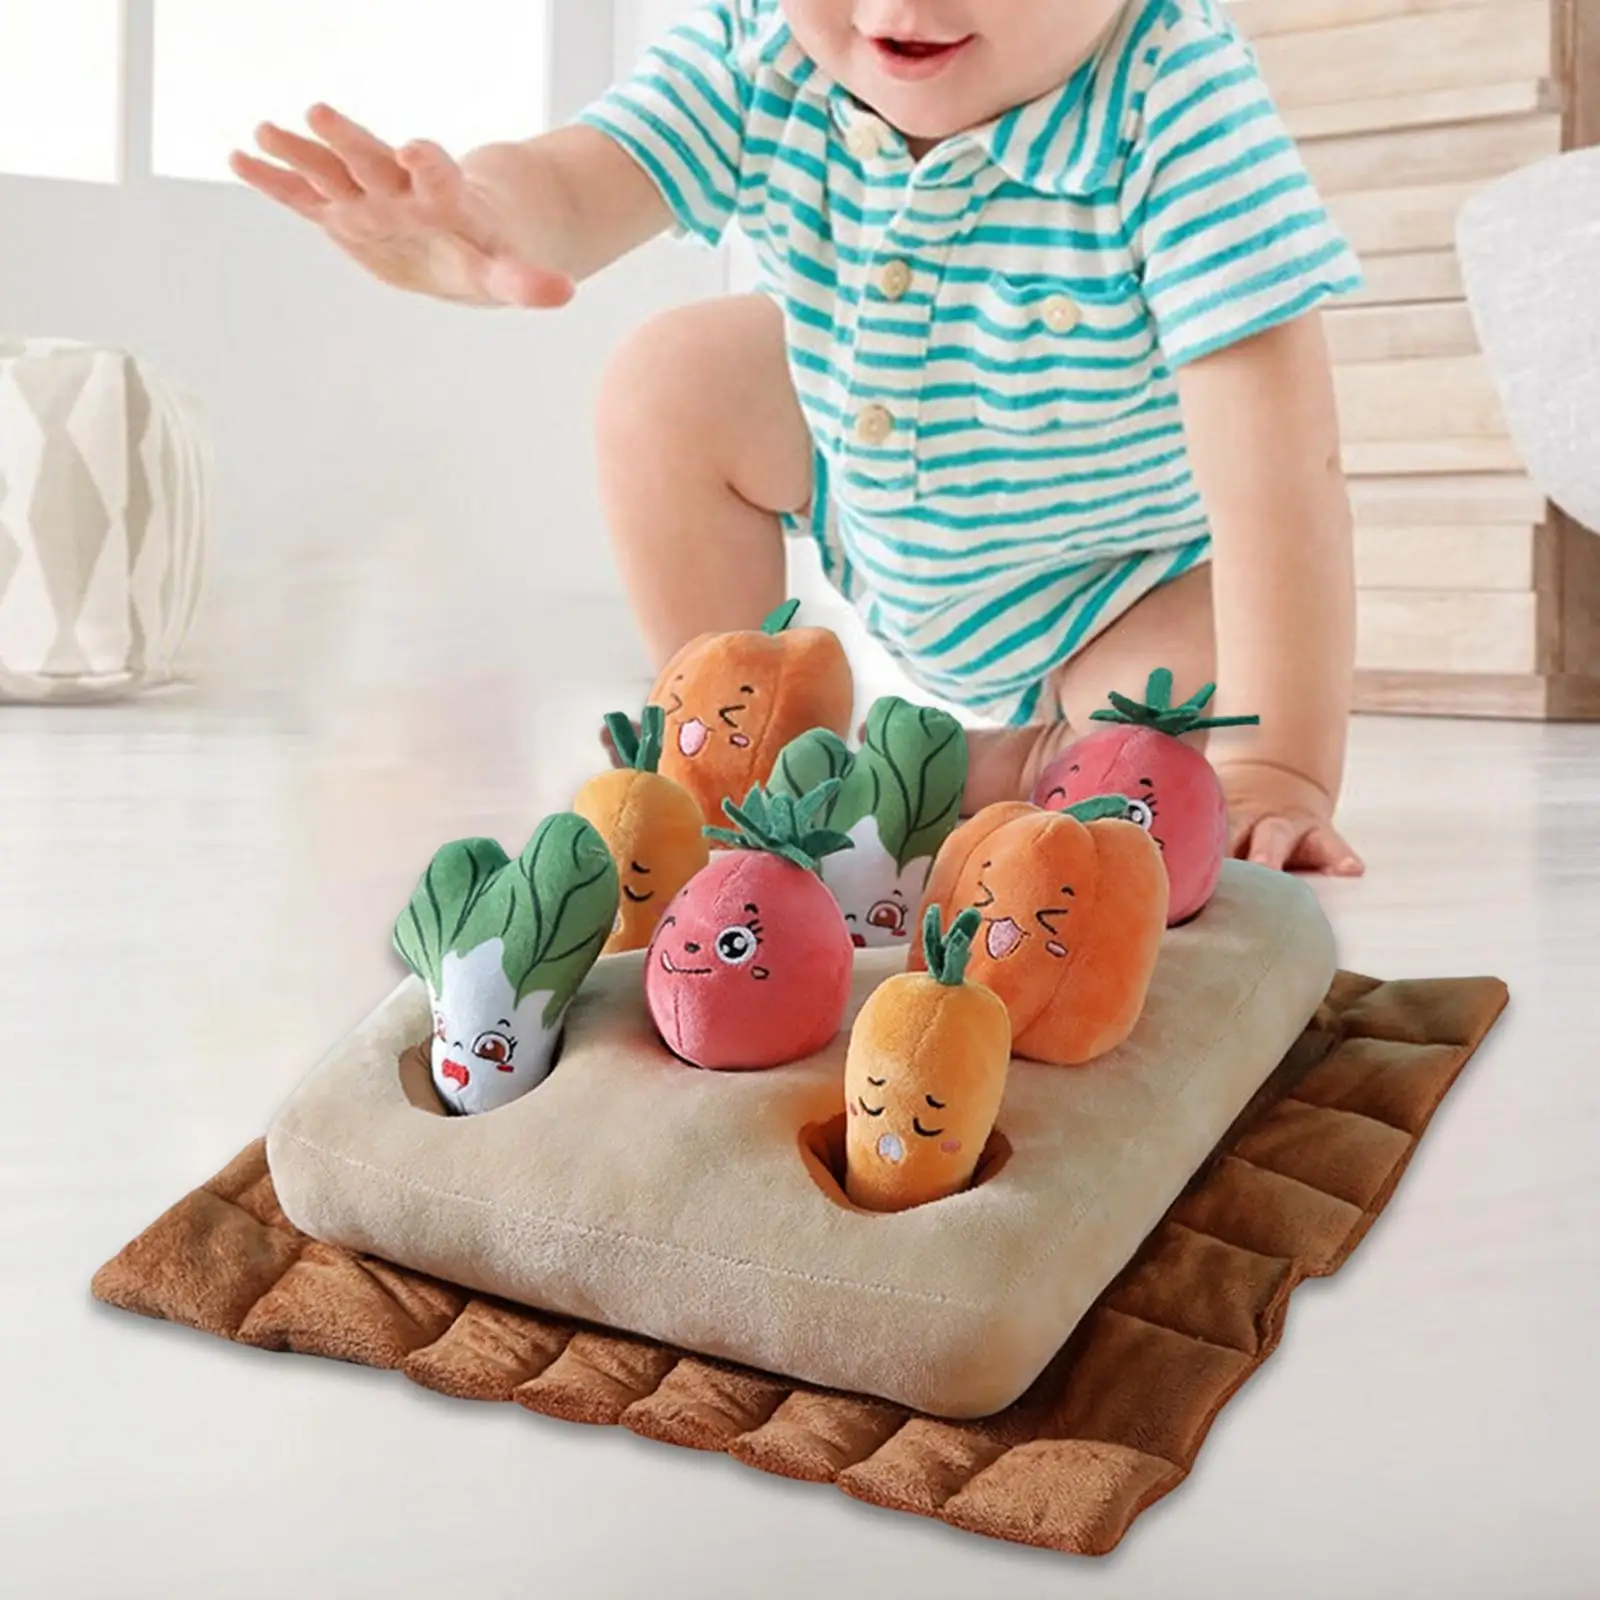 Baby Preschool Learning Toy Vegetable Plush Toy for Parent Child Interaction